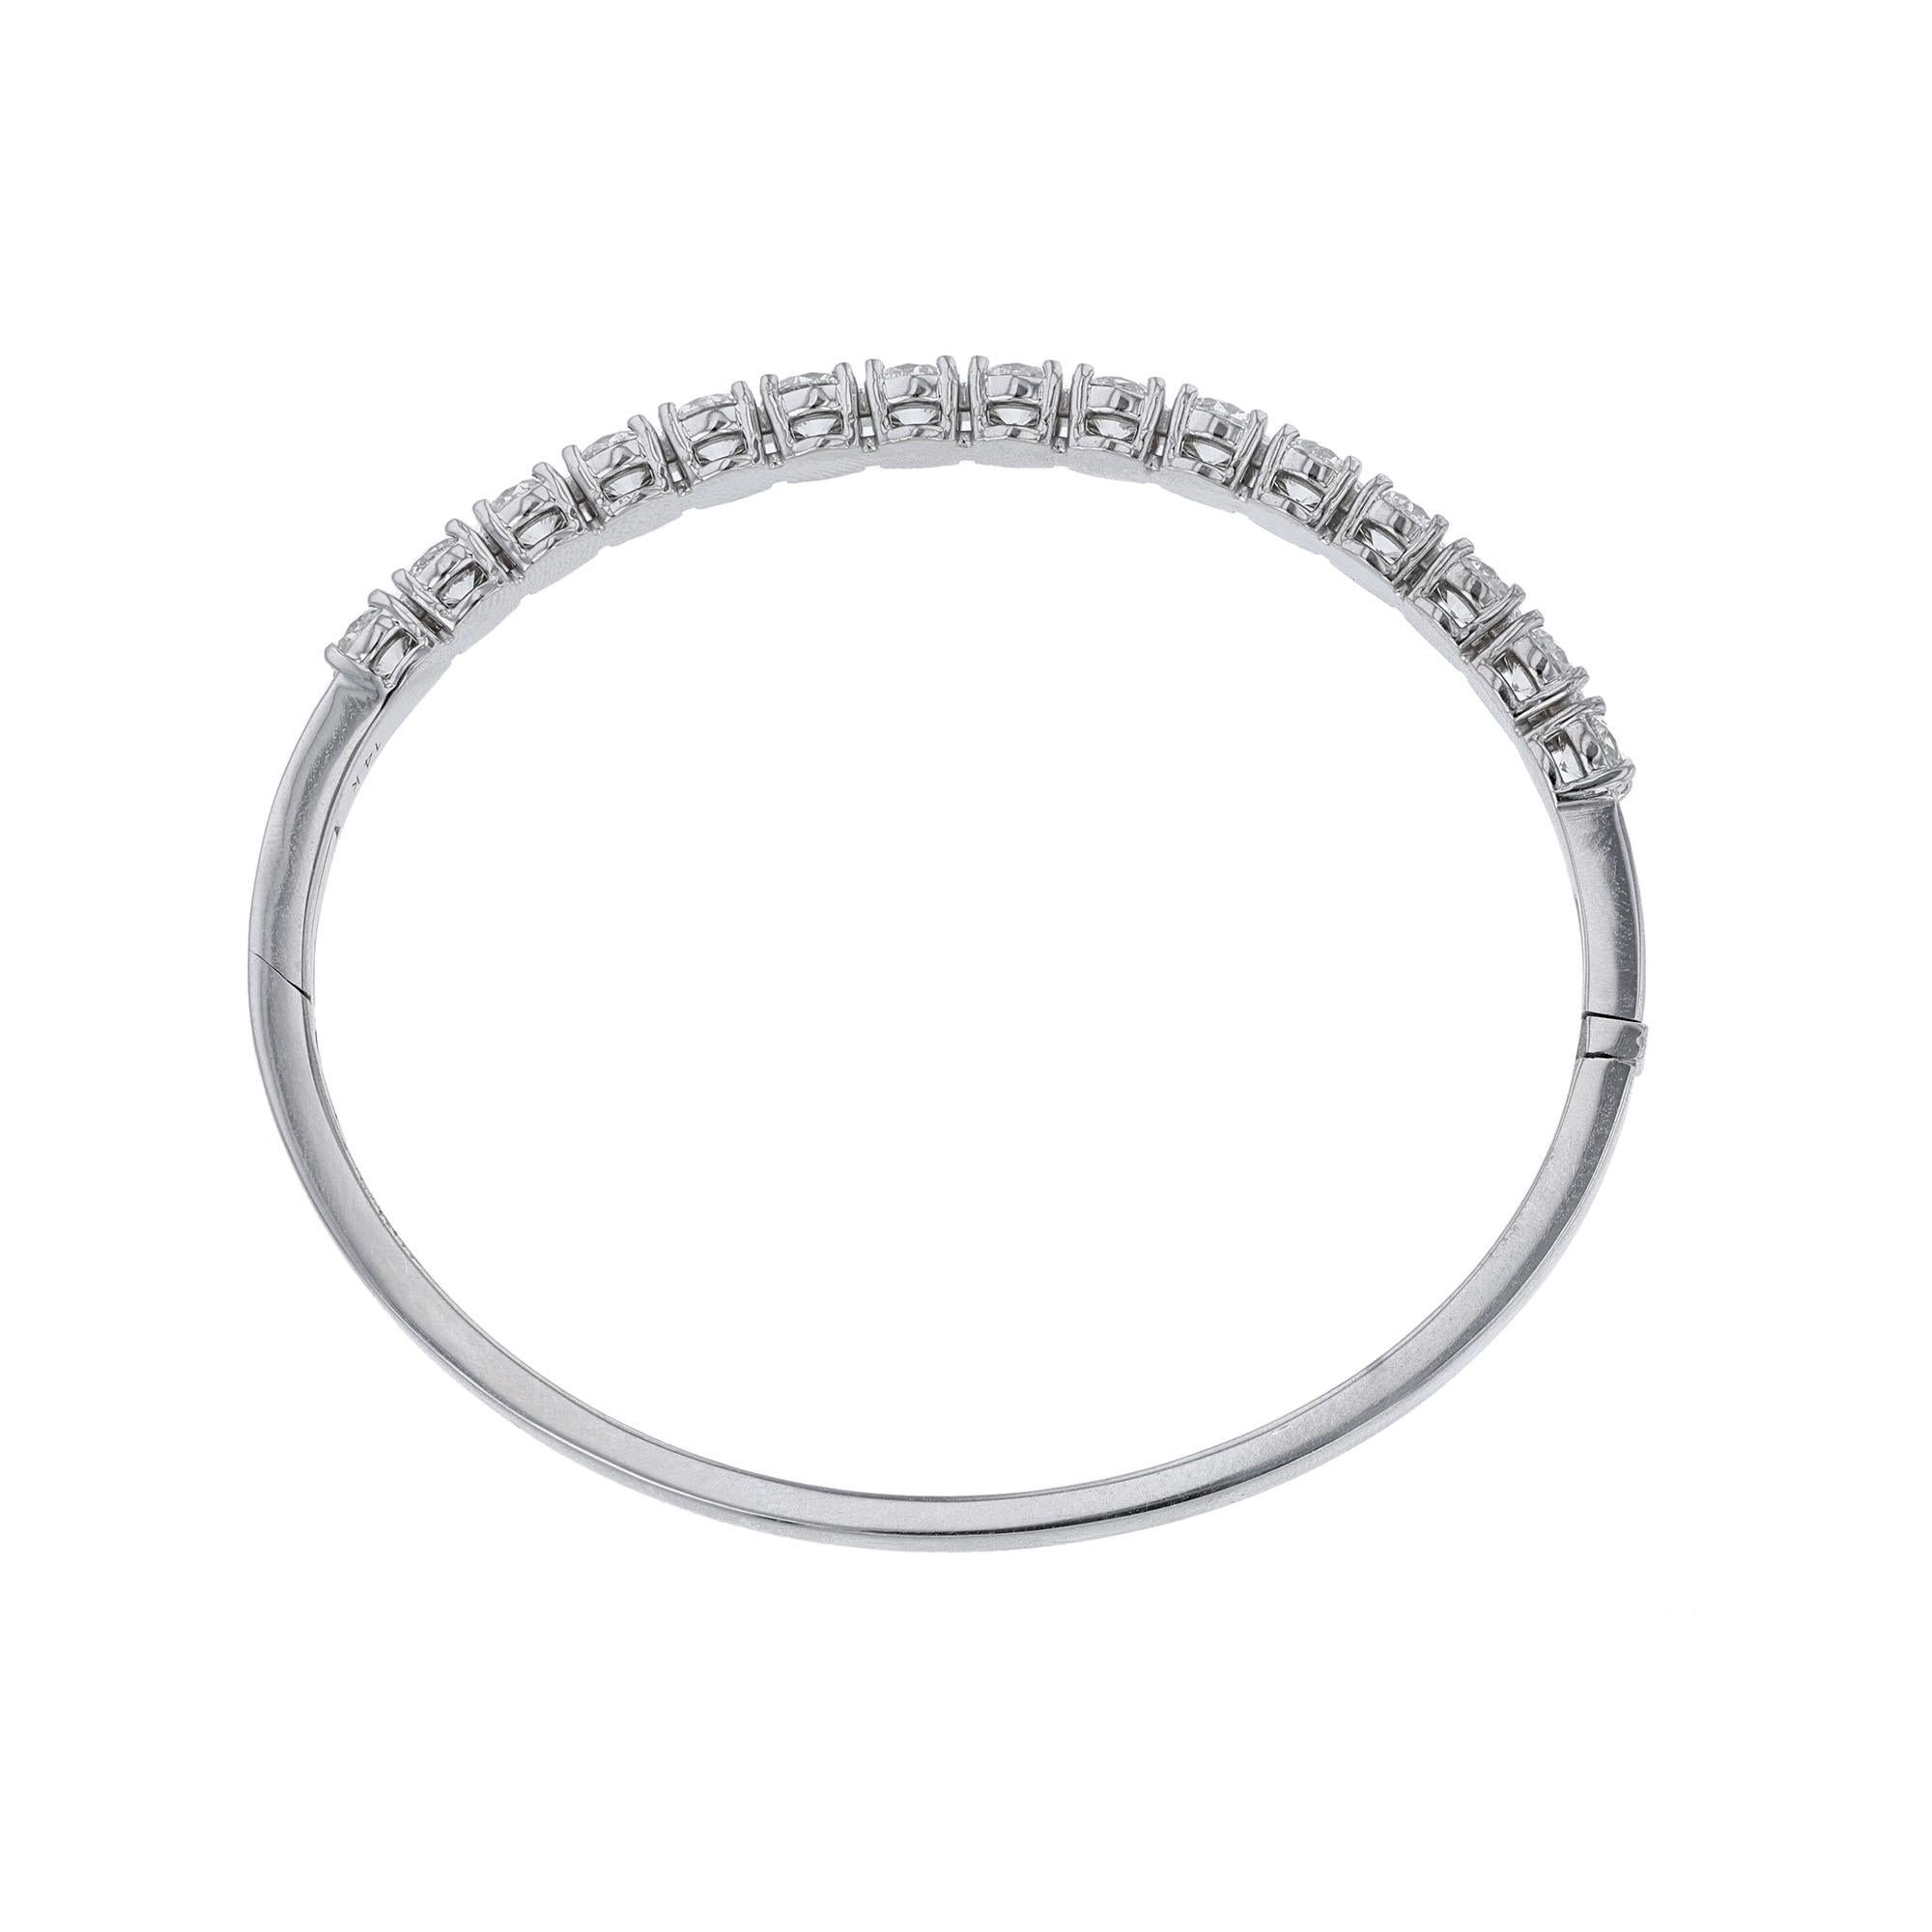 Round Cut 14K White Gold Round Diamond Bangle, 4.67cts. For Sale